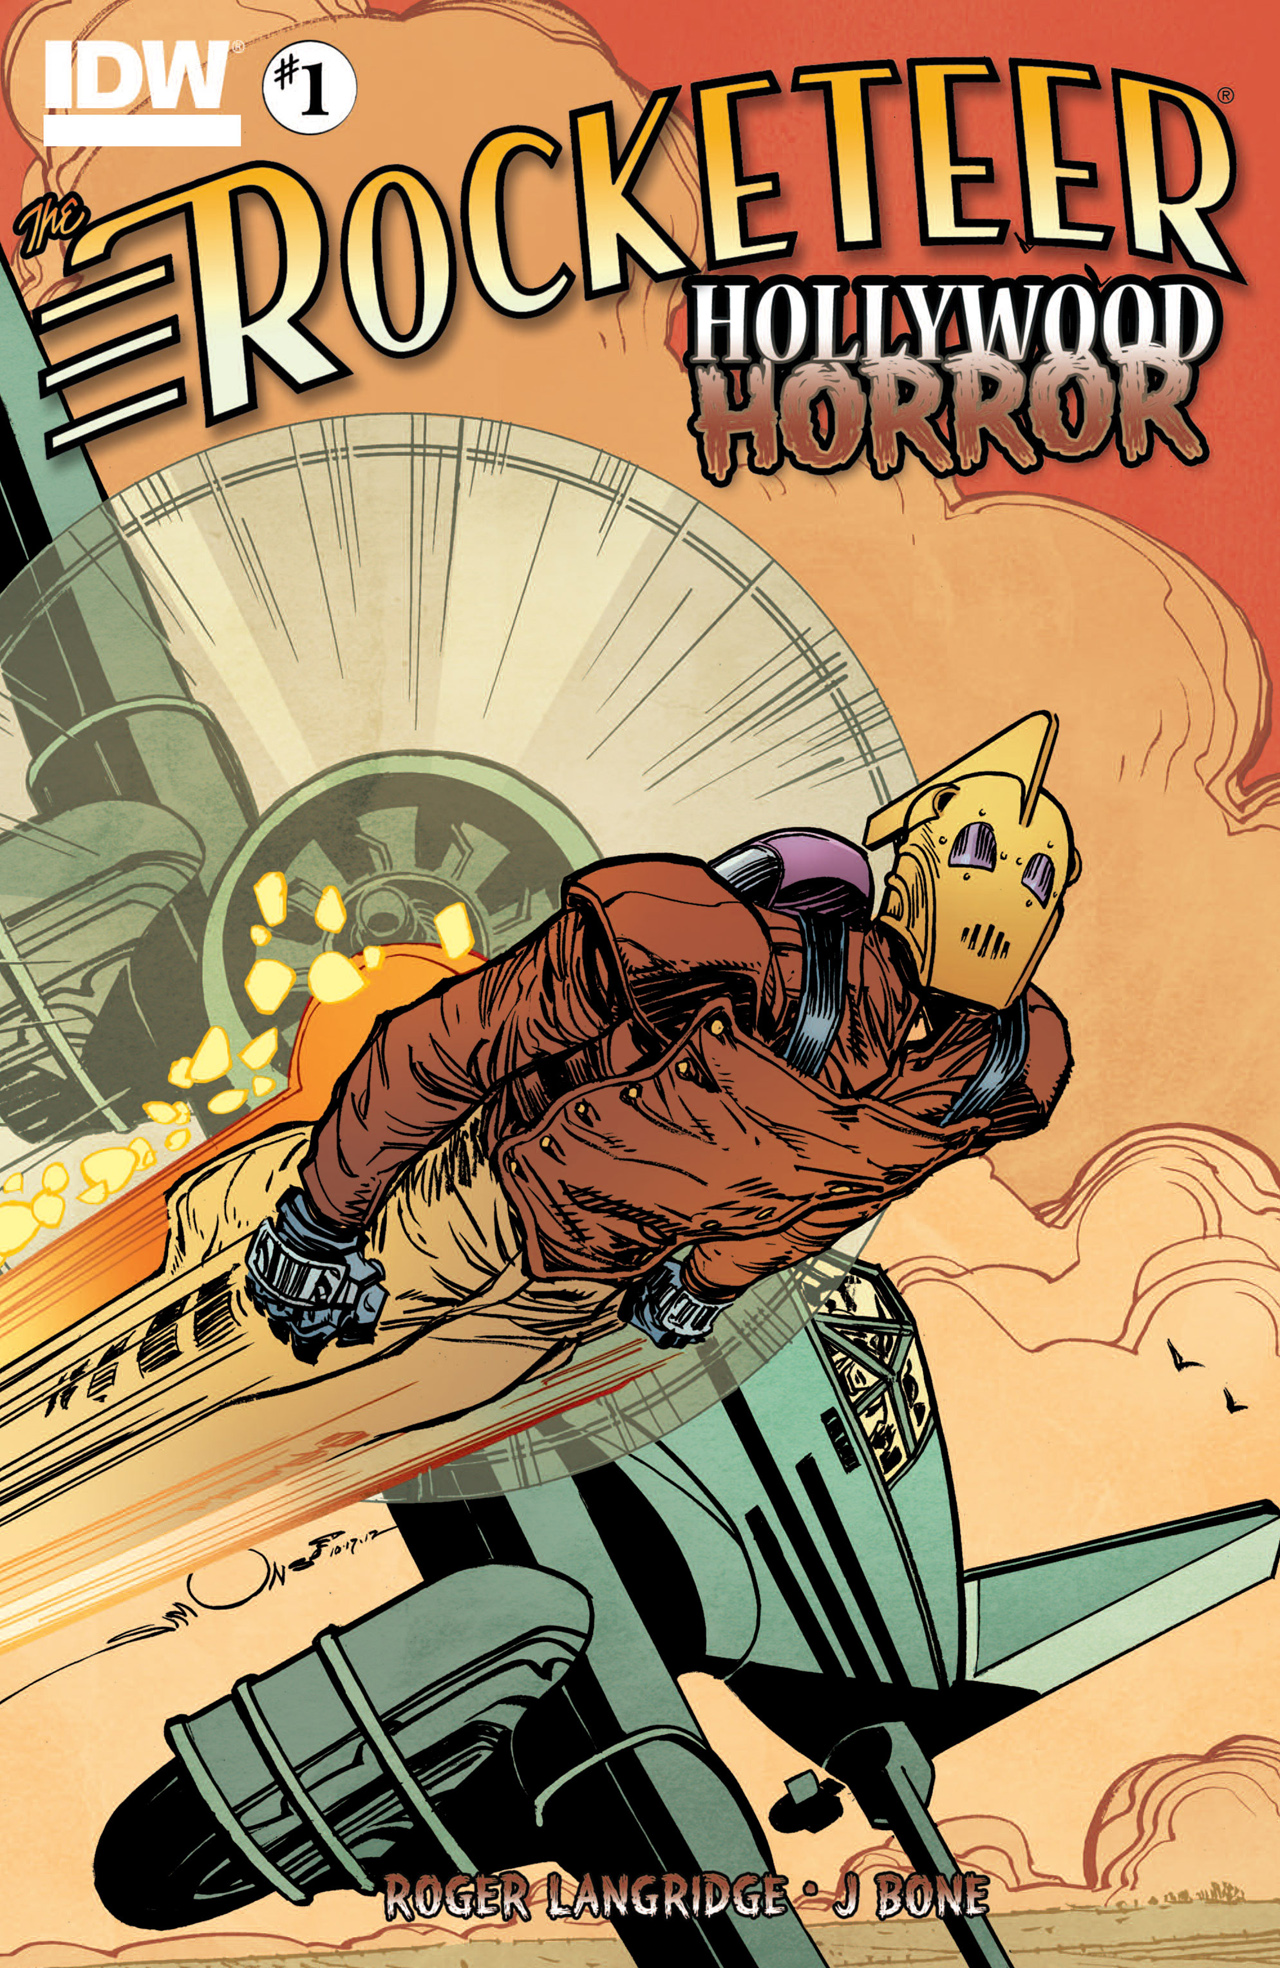 Read online The Rocketeer: Hollywood Horror comic -  Issue #1 - 1